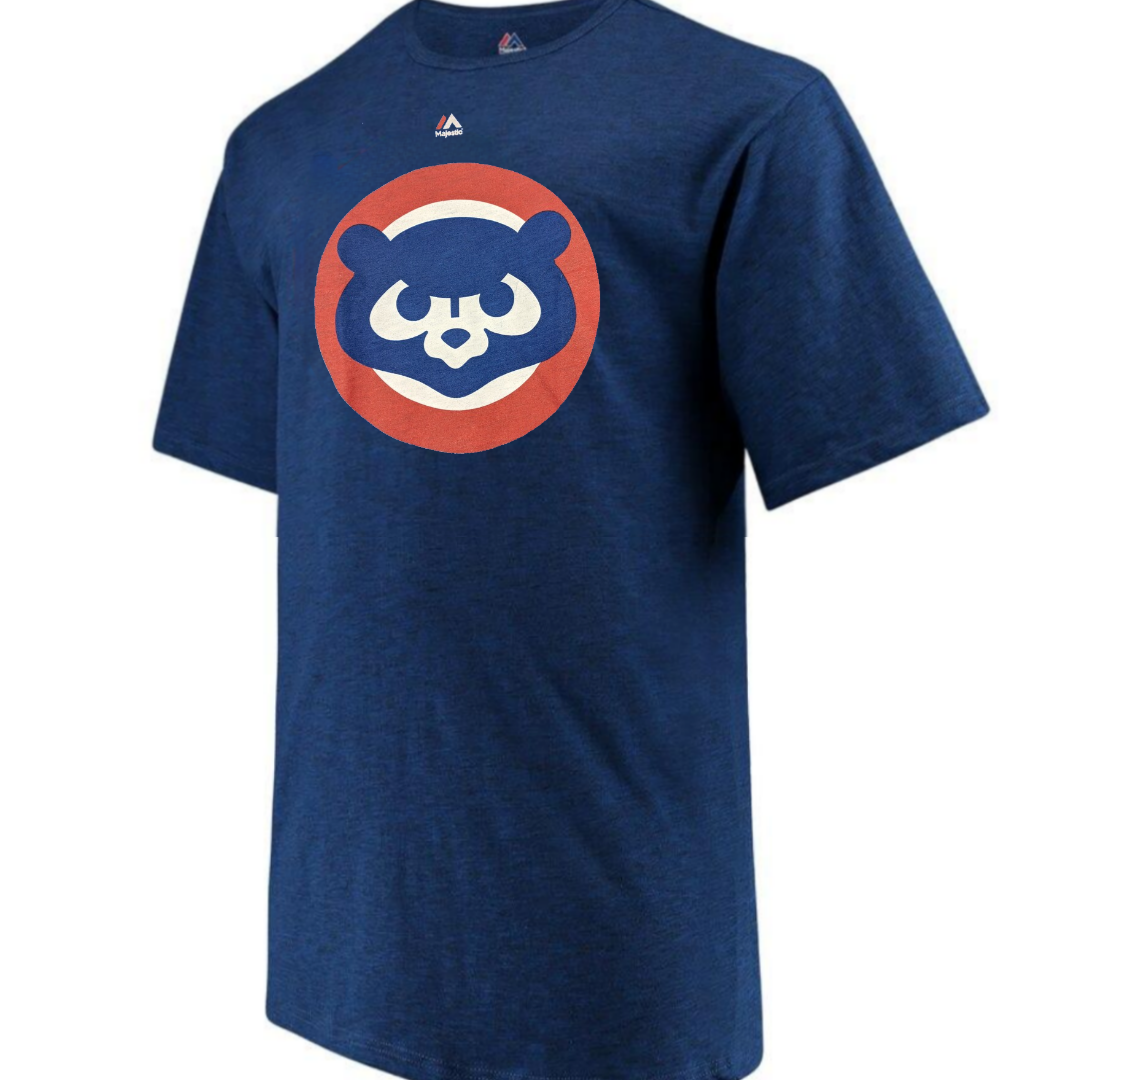 Men's Chicago Cubs Nike Navy Cooperstown Collection Logo T-Shirt